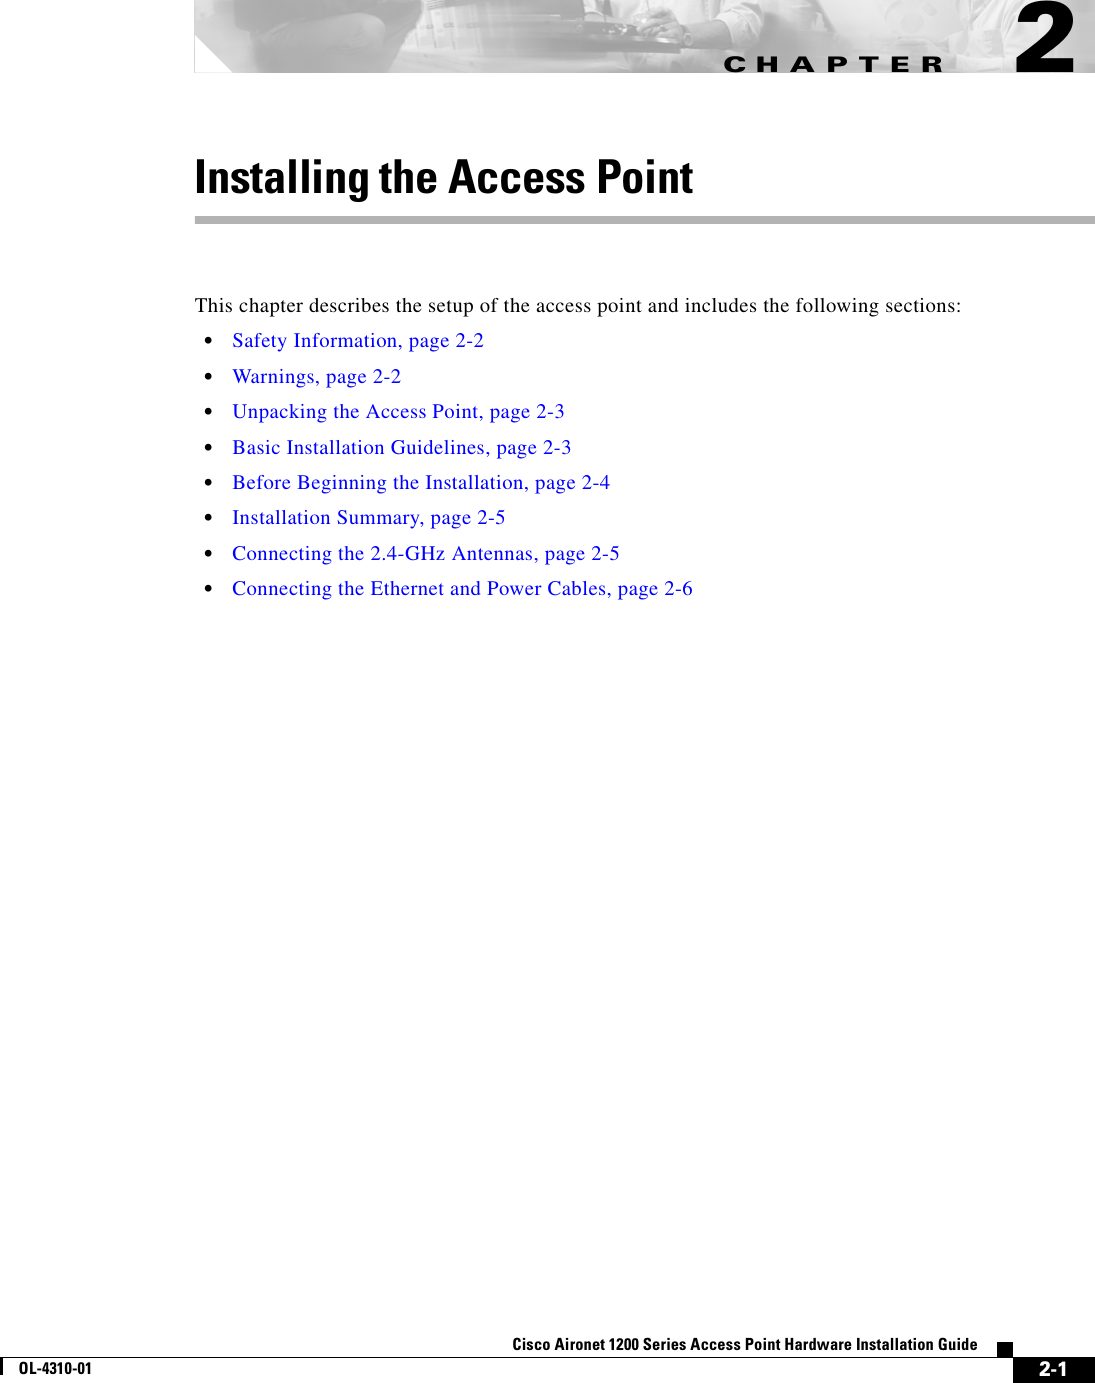 CHAPTER 2-1Cisco Aironet 1200 Series Access Point Hardware Installation GuideOL-4310-012Installing the Access PointThis chapter describes the setup of the access point and includes the following sections:•Safety Information, page 2-2•Warnings, page 2-2•Unpacking the Access Point, page 2-3•Basic Installation Guidelines, page 2-3•Before Beginning the Installation, page 2-4•Installation Summary, page 2-5•Connecting the 2.4-GHz Antennas, page 2-5•Connecting the Ethernet and Power Cables, page 2-6